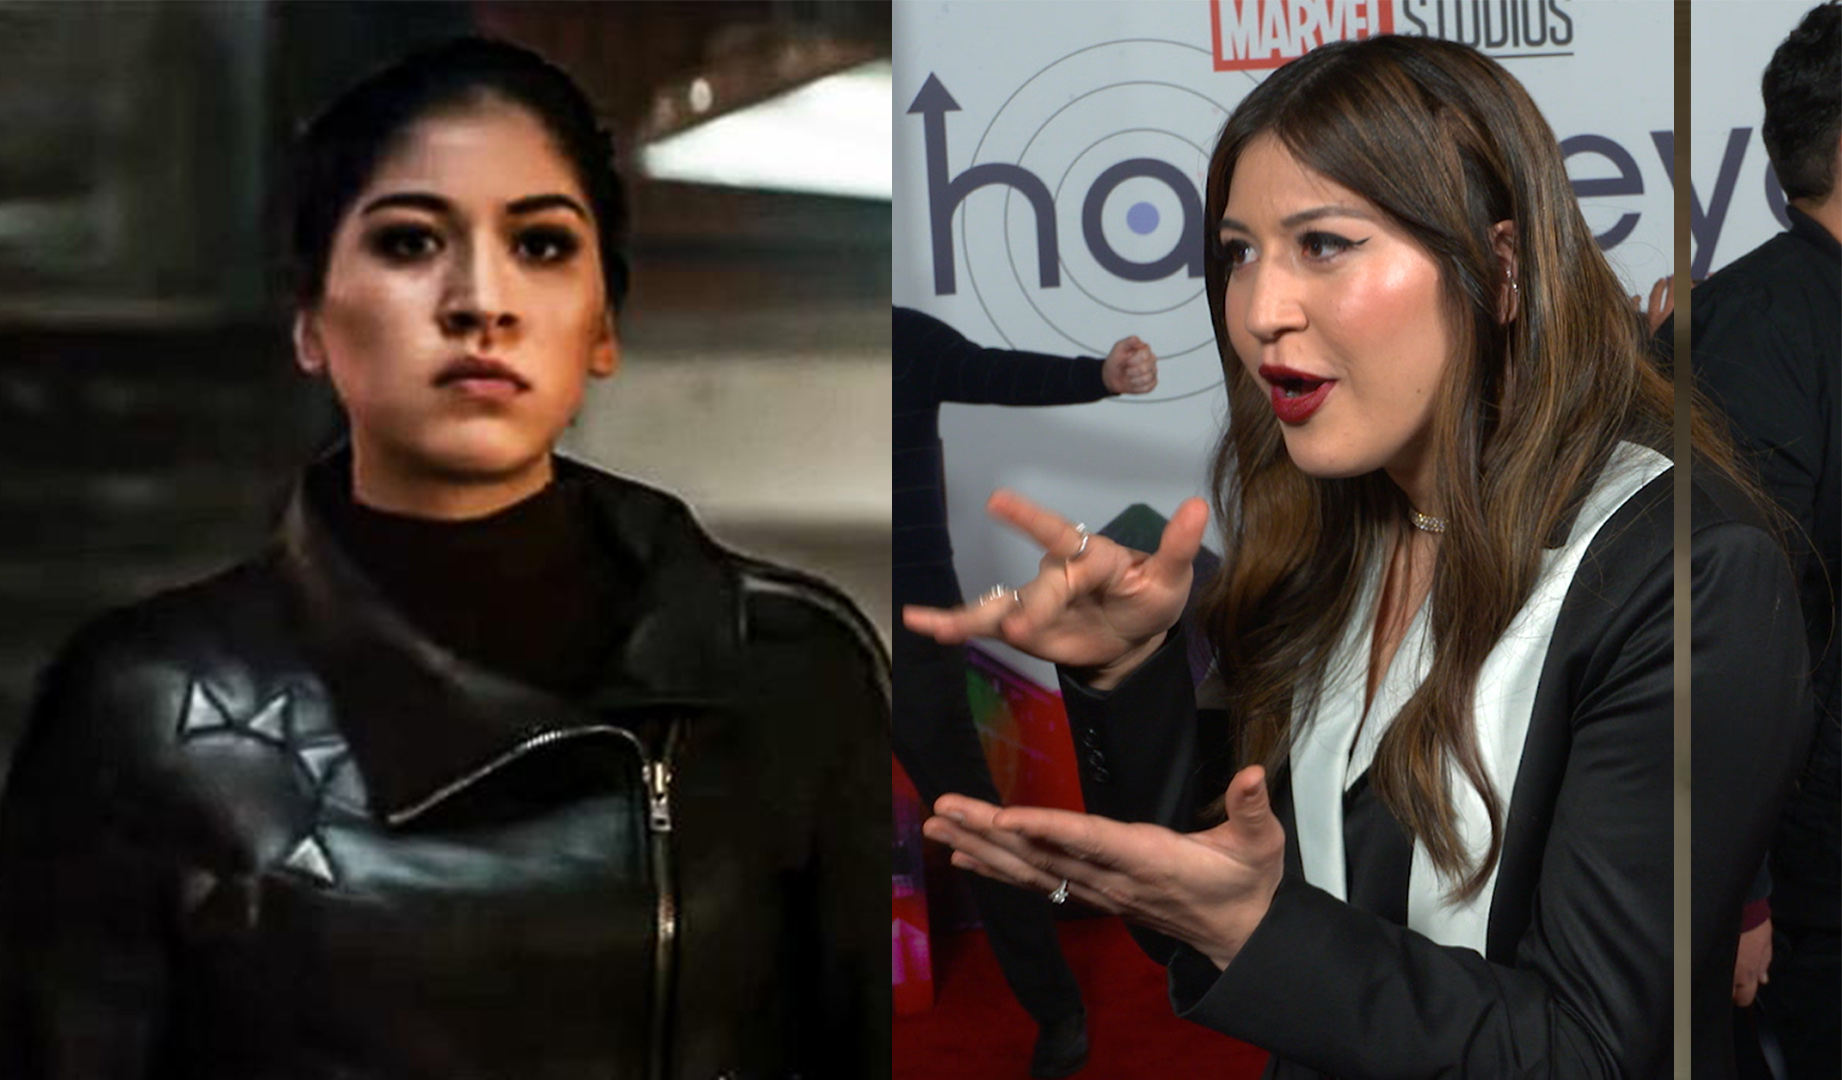 Image of Alaqua Cox as Echo in 'Hawkeye' next to an image of her on the red carpet